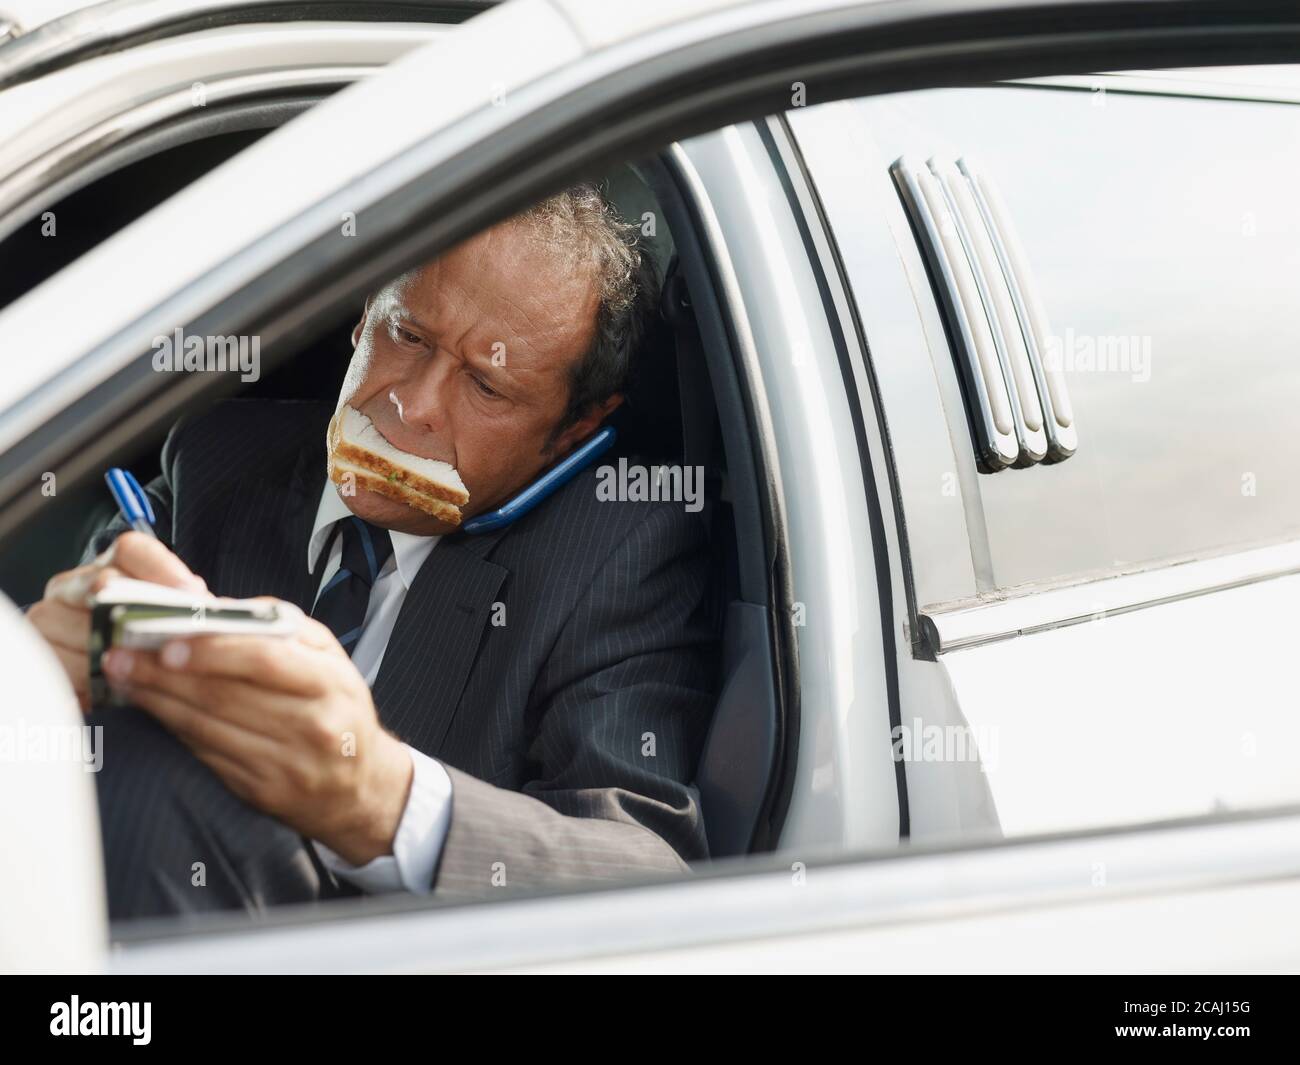 Driver Of White Limousine Eating Lunch Inside Car Stock Photo